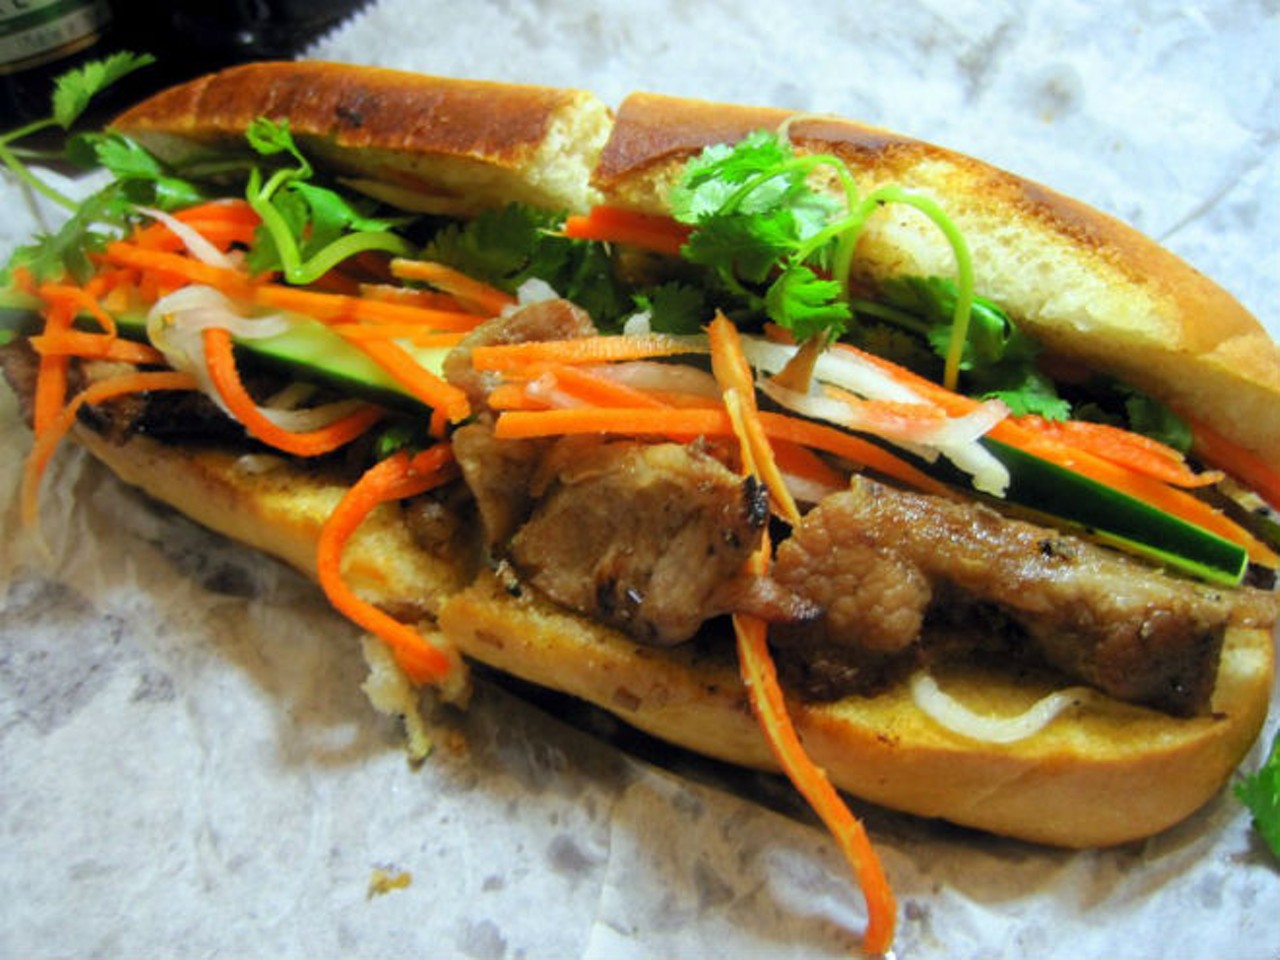 Anh Hong 
1124 E. Colonial Drive, 407-999-2656
Even within the tough competition of Mills 50, the Anh Hong special banh m&iacute; is a cut above: ham, p&acirc;t&eacute;, sausage, pork, headcheese and pickled vegetables on buttered French bread for just $2.95 (if you're squeamish about variety meats, choose the sunnyside-up egg sandwich for $3.50). Add a Vietnamese iced coffee for $2.75 and this is still the cheapest lunch of the bunch.
Photo via Yelp